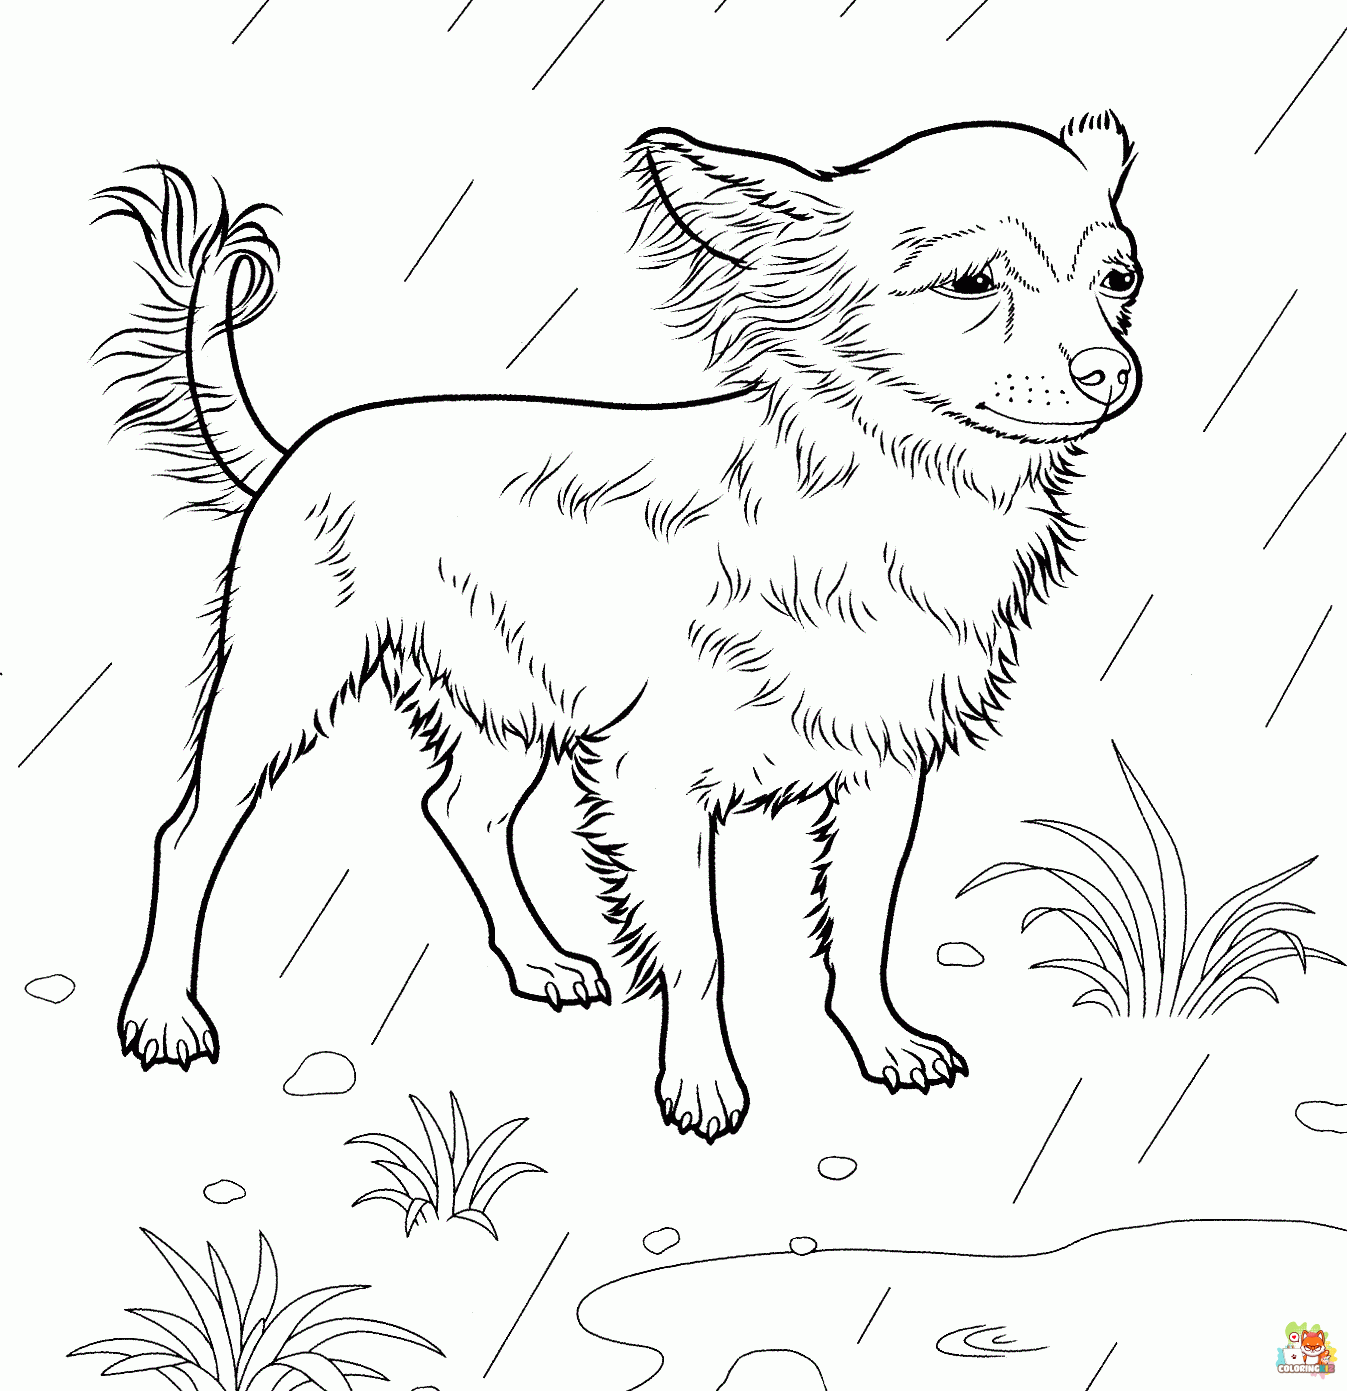 Pomeranian and Chihuahua Coloring Pages 1